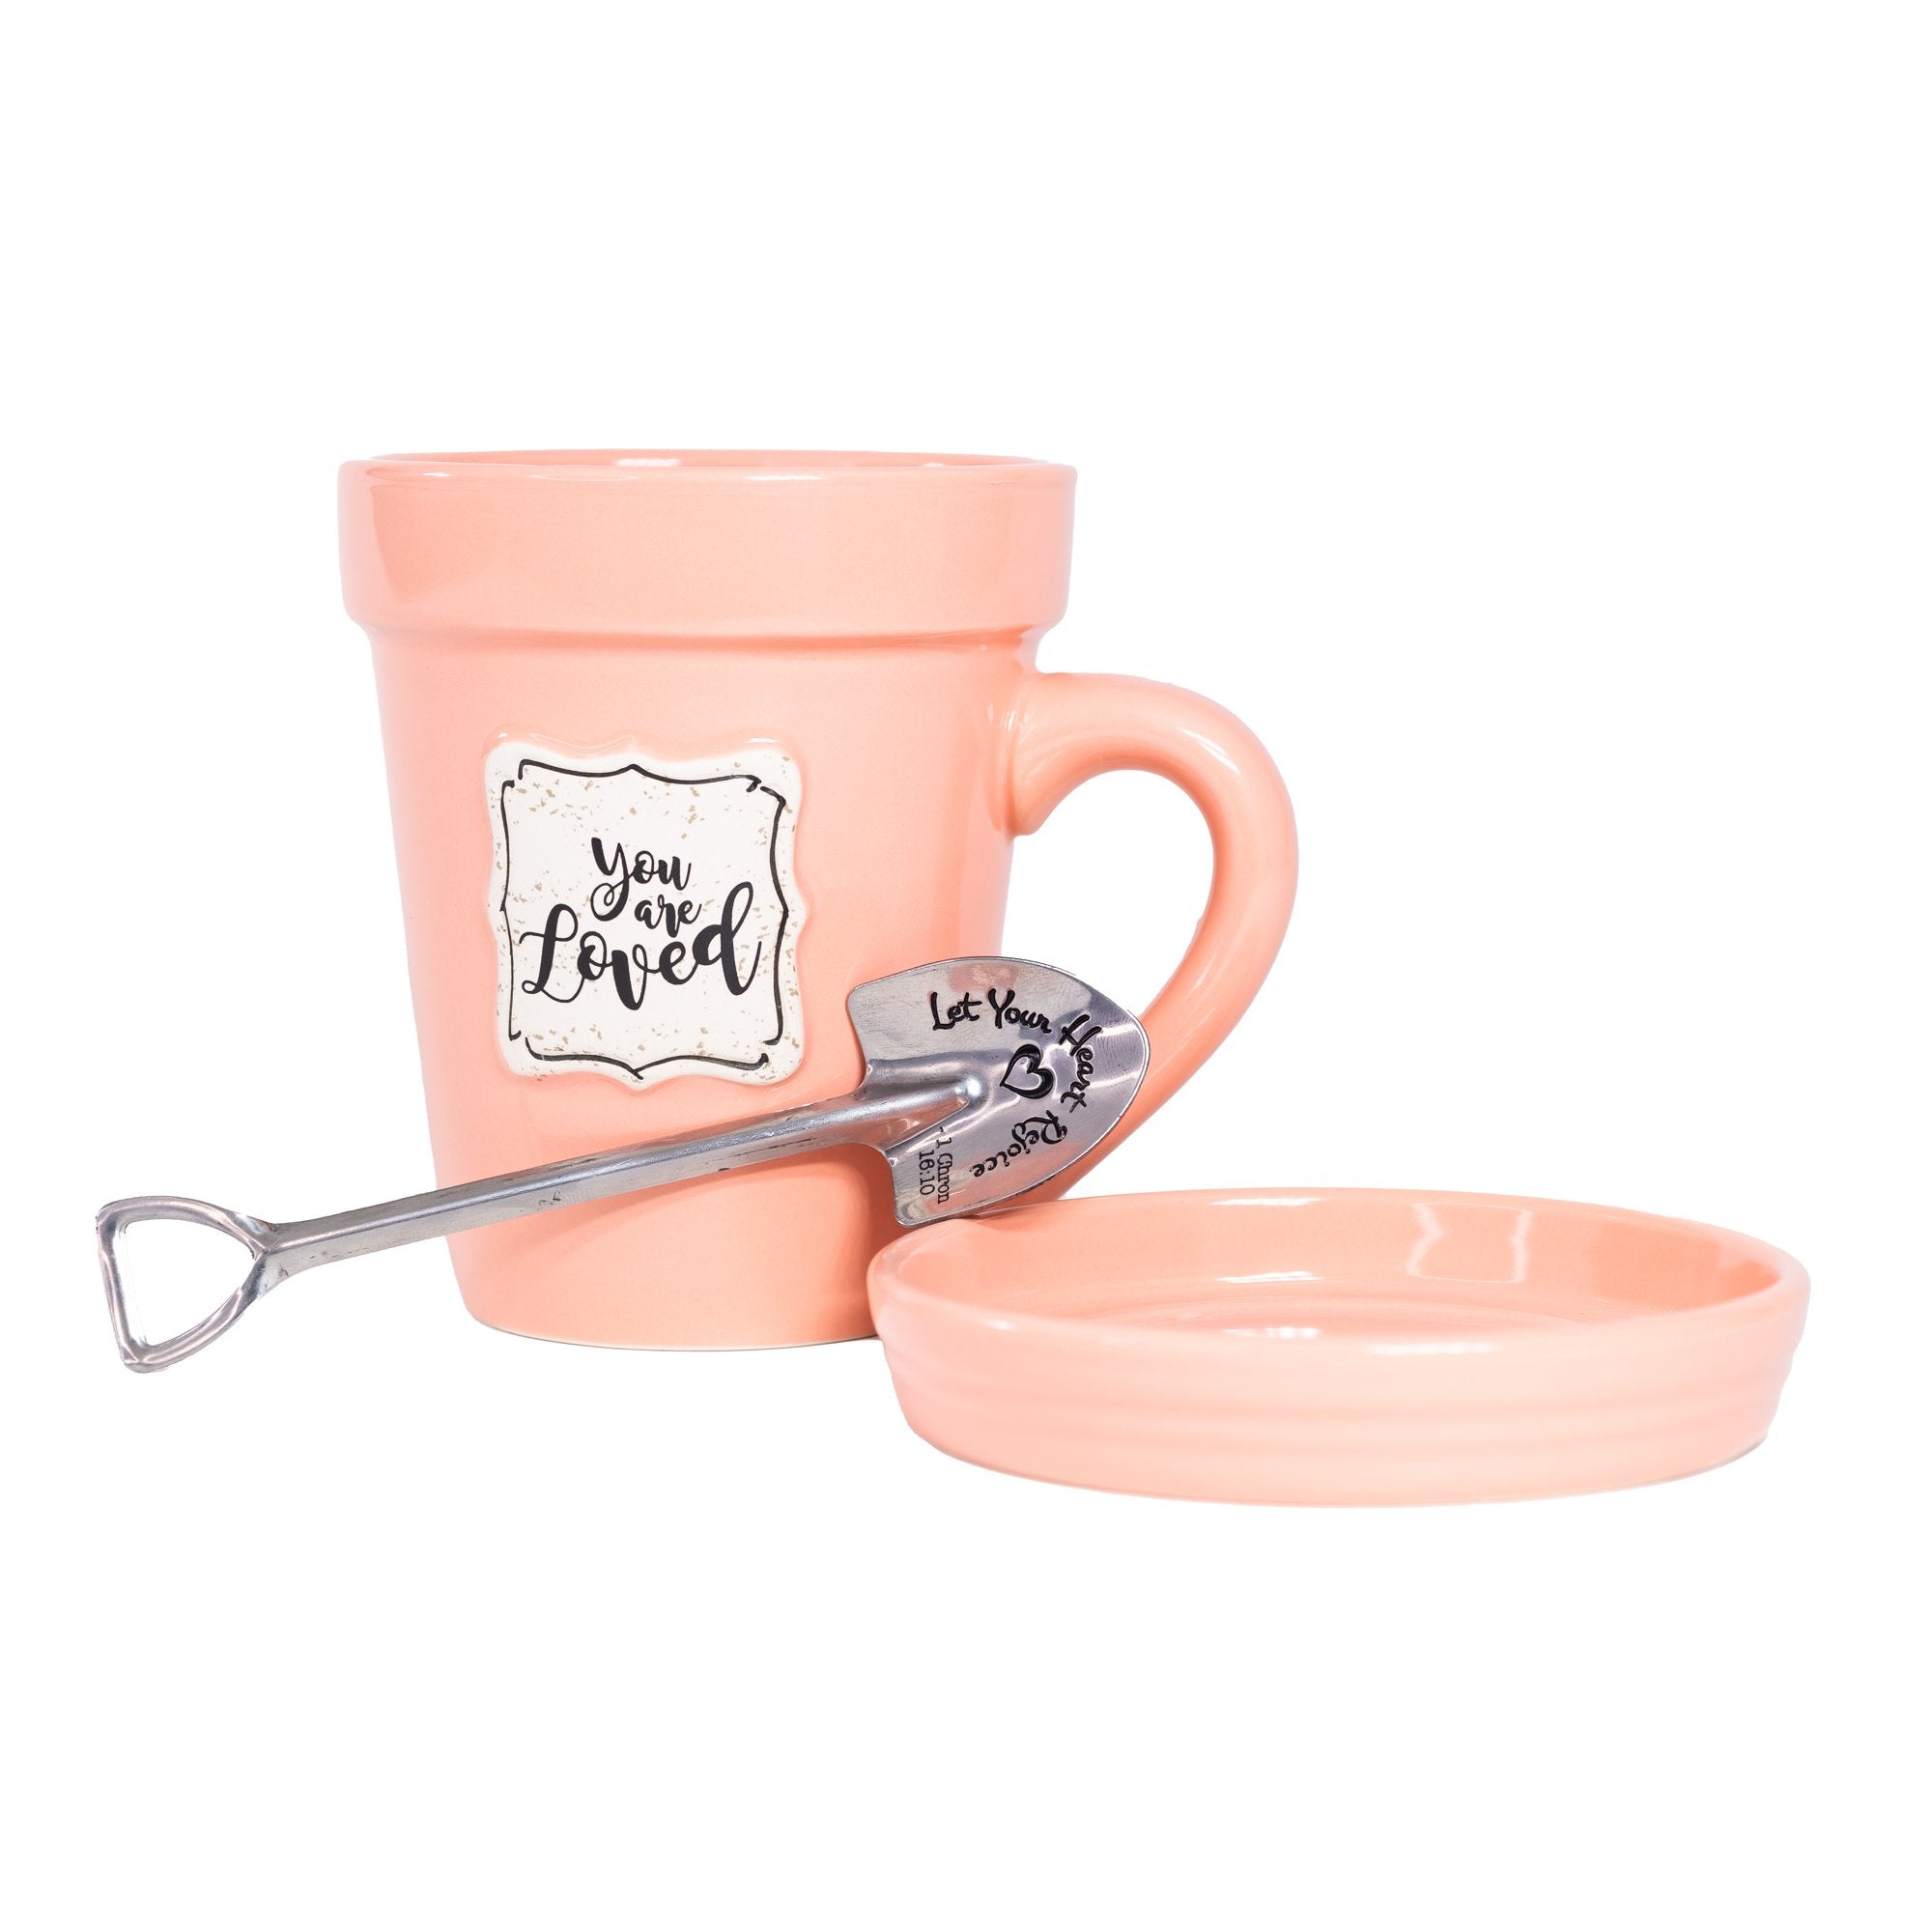 Peach Flower Pot Mug w/Scripture - "You are Loved"